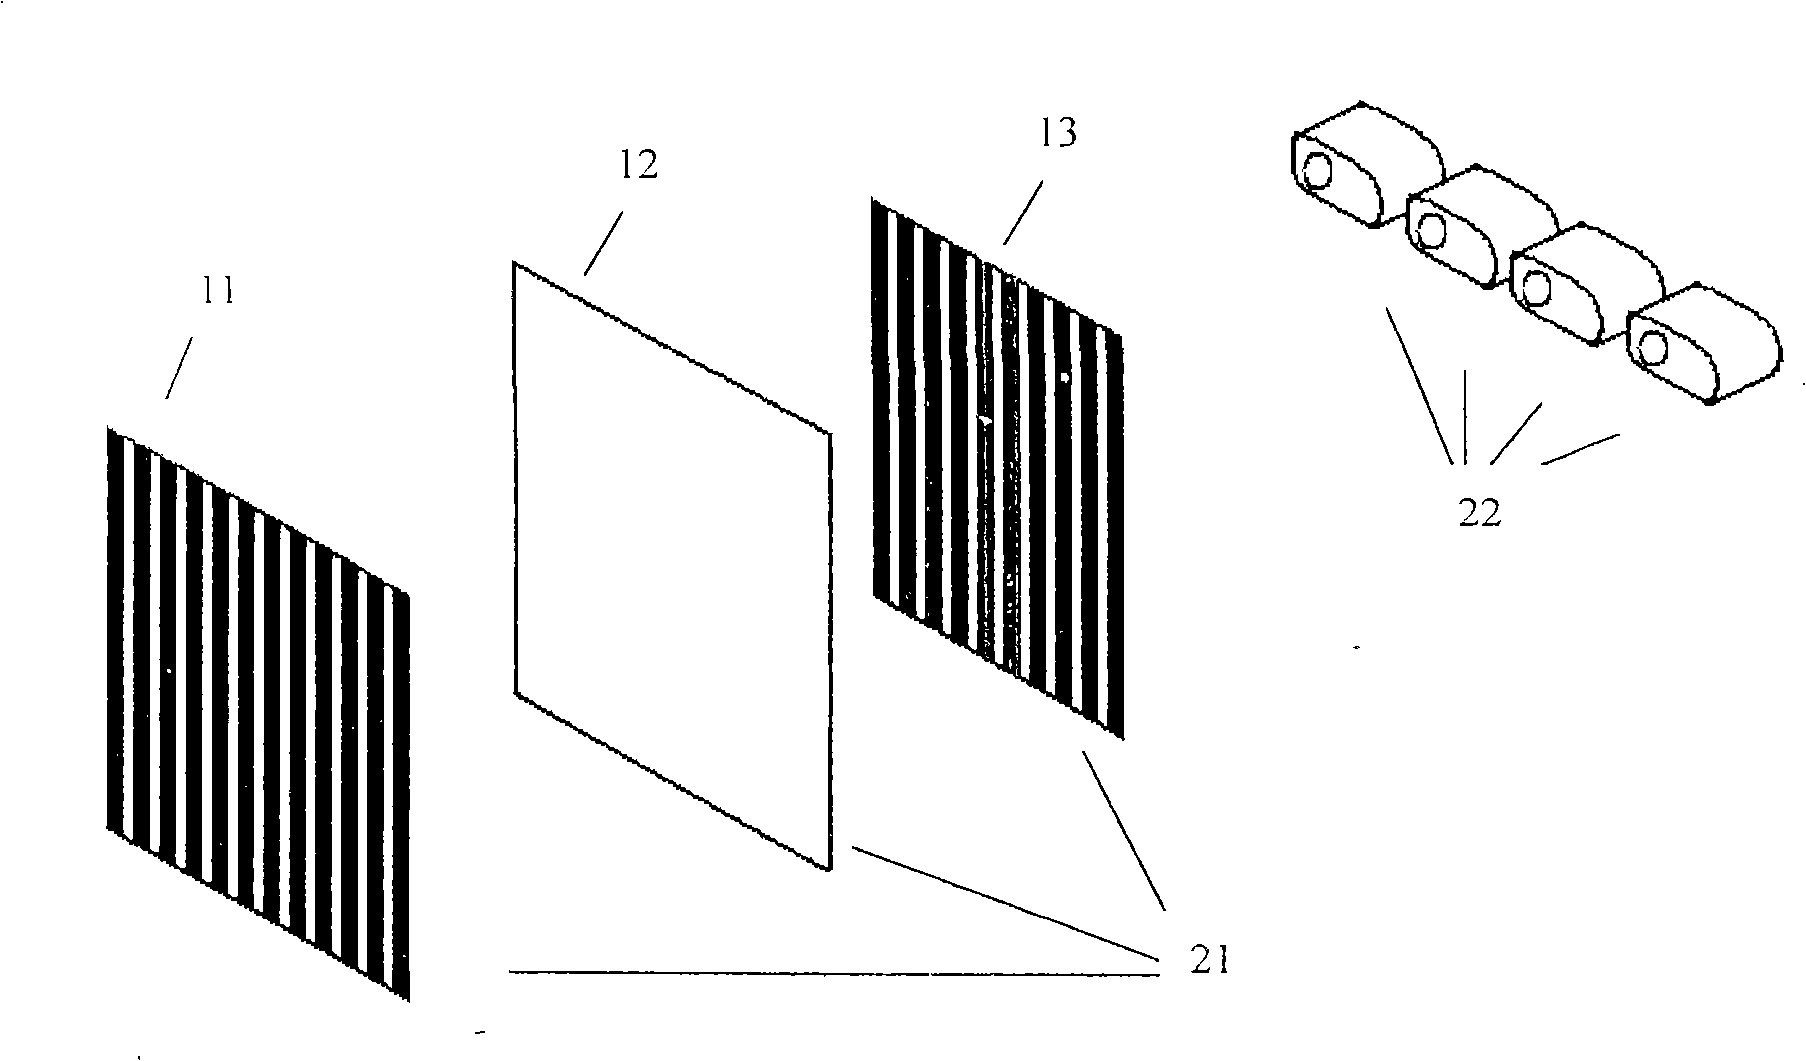 Double grating free stereo projection display apparatus